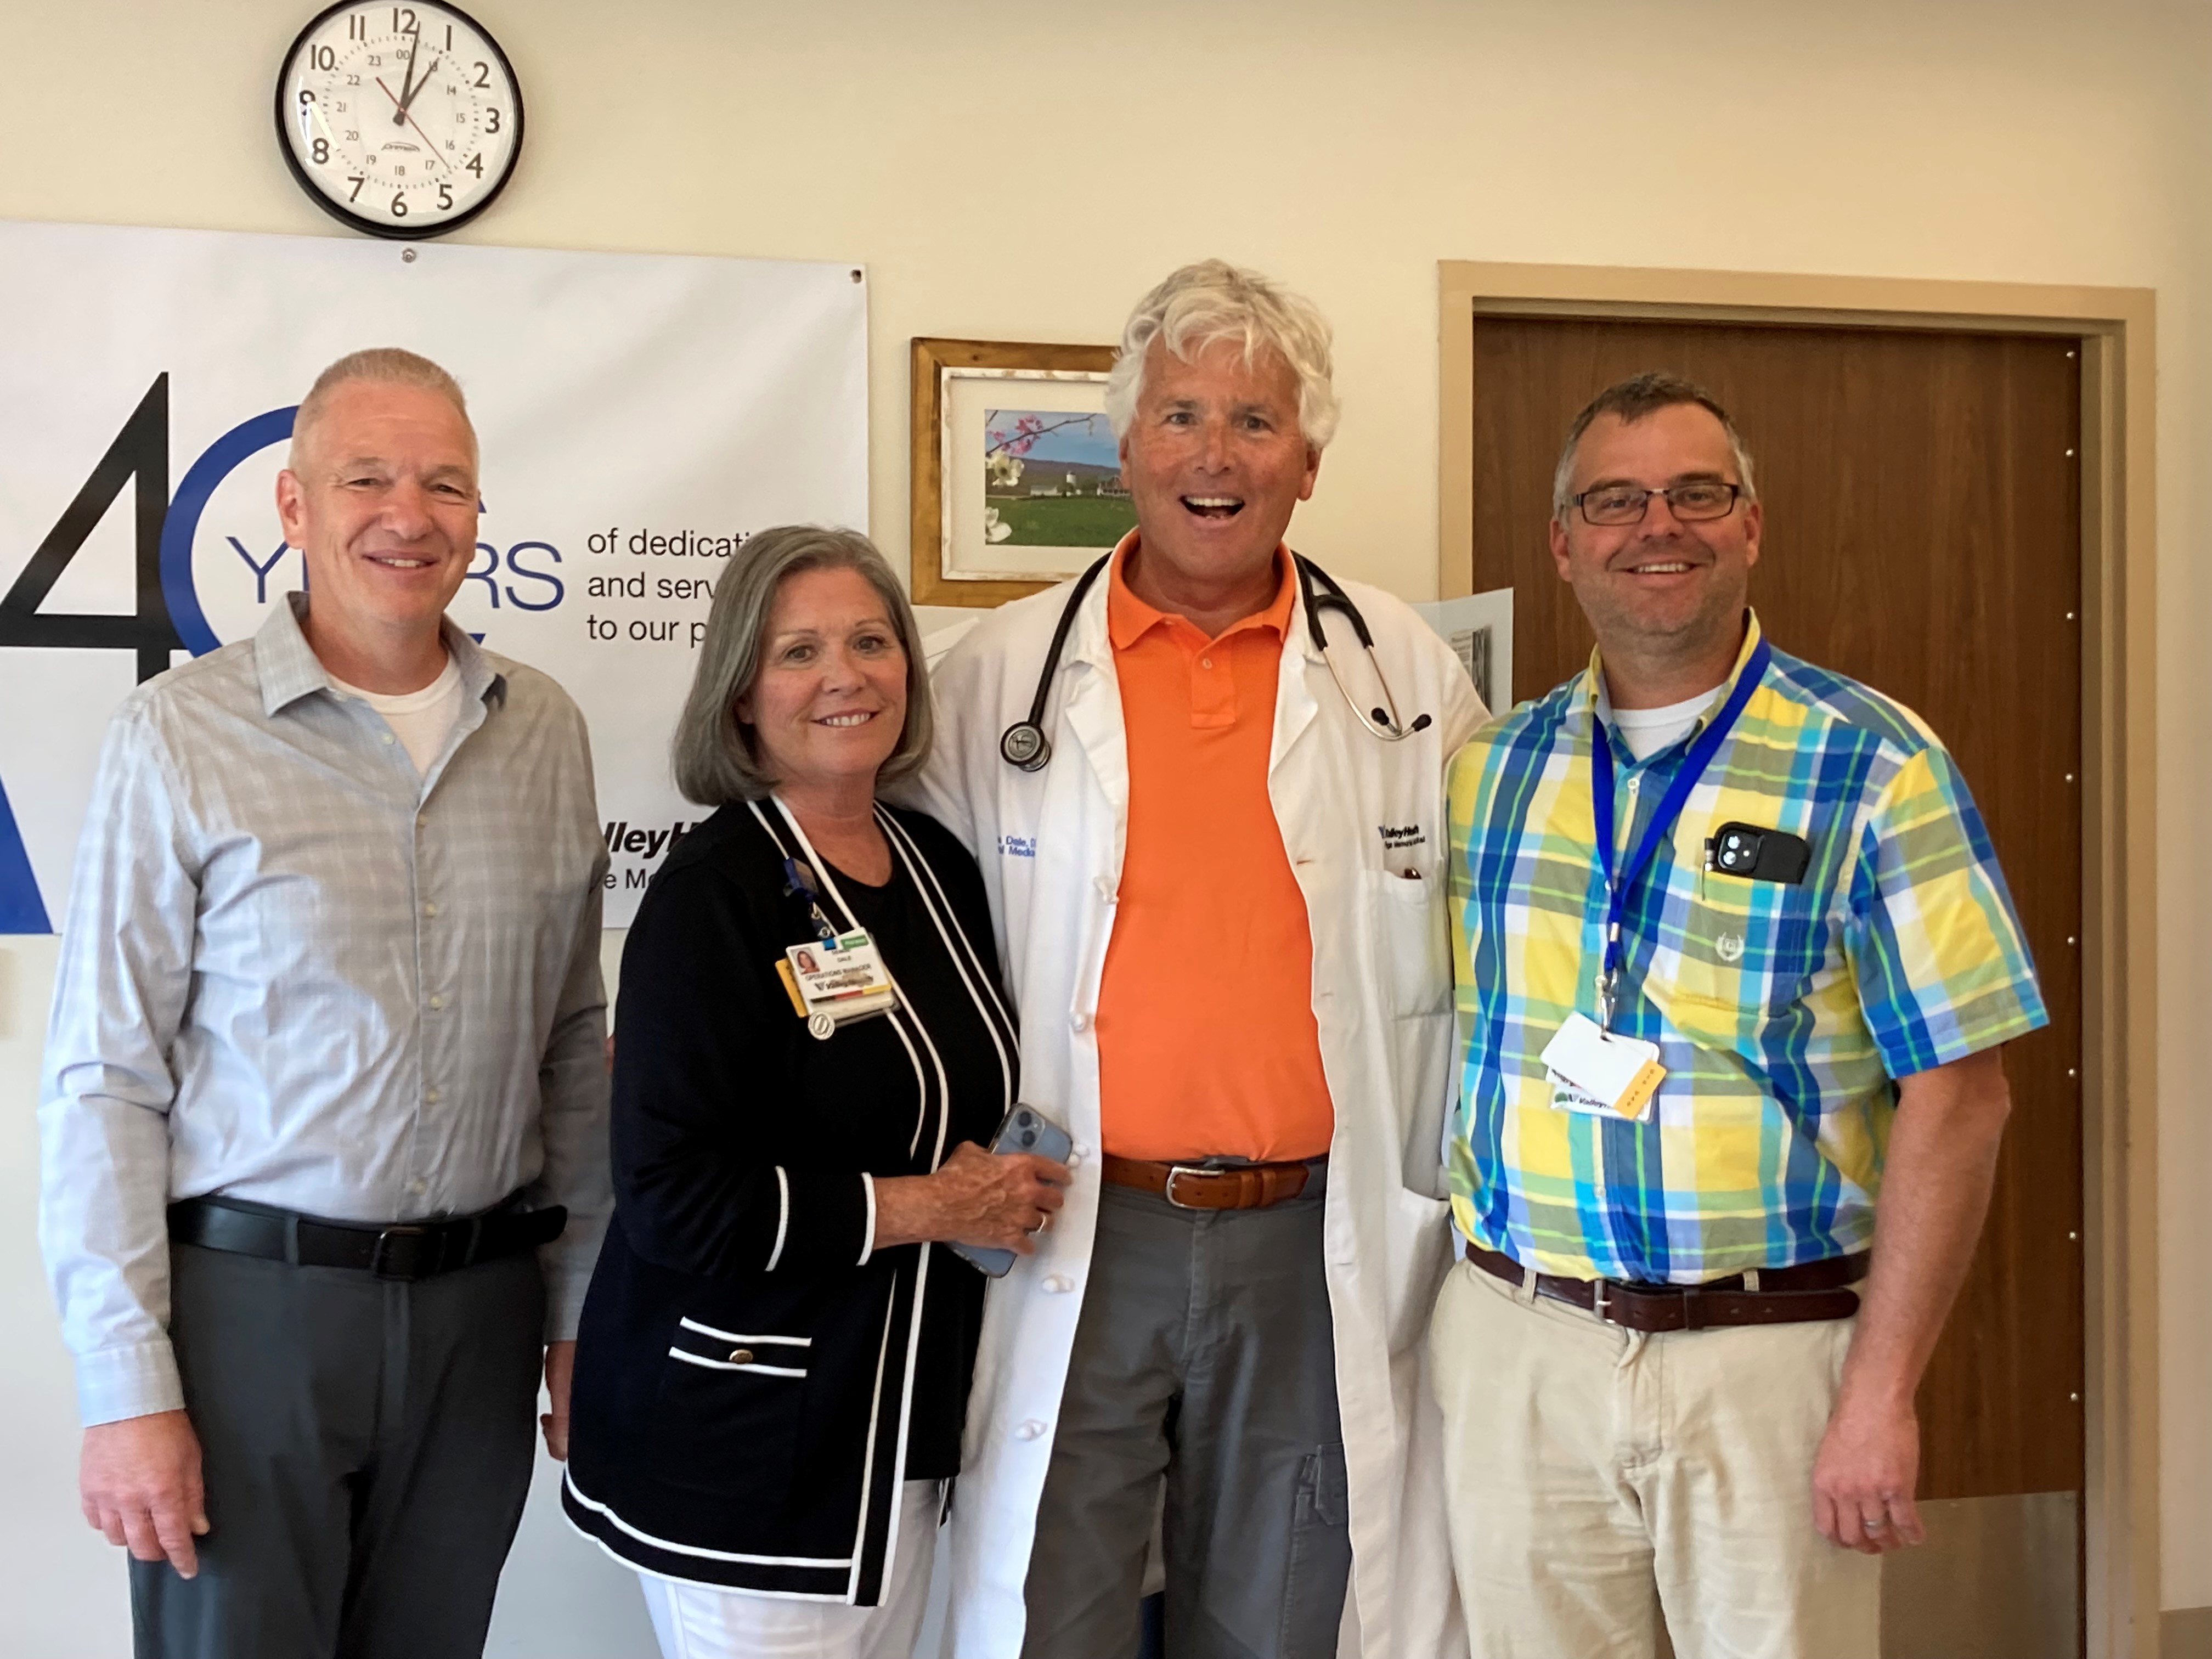 Dr. Dale with Luray Councilman Jason Pettit, wife Denise Dale and Travis Clark